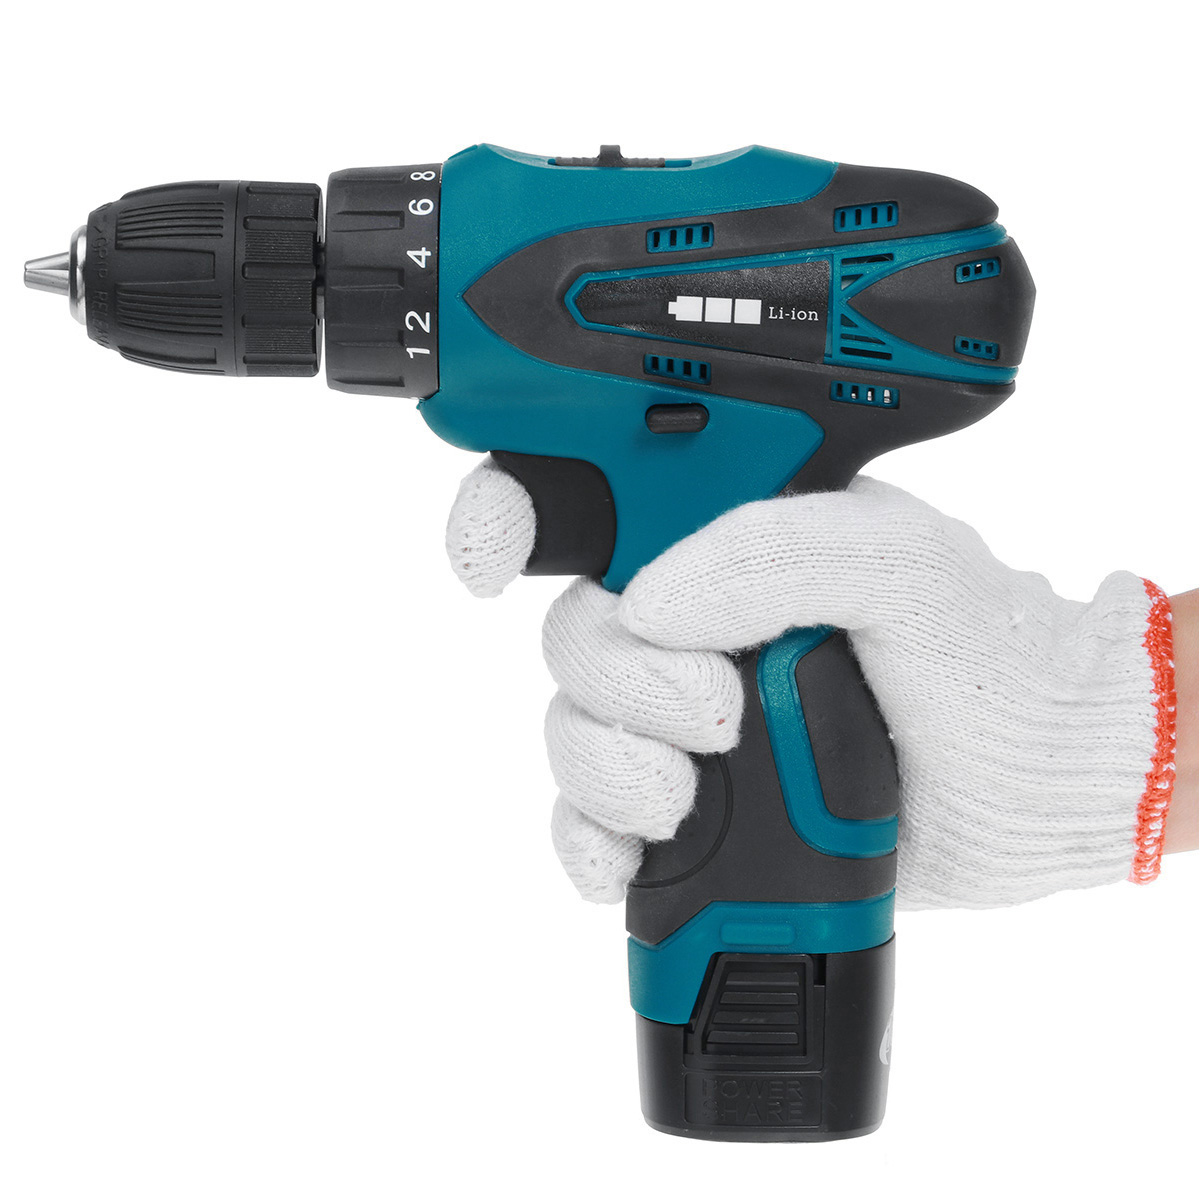 168V-Cordless-Electric-Drill-Driver-231-Torque-Multifuntional-Screwdriver-Power-Tool-W-Battery--Dril-1863336-8